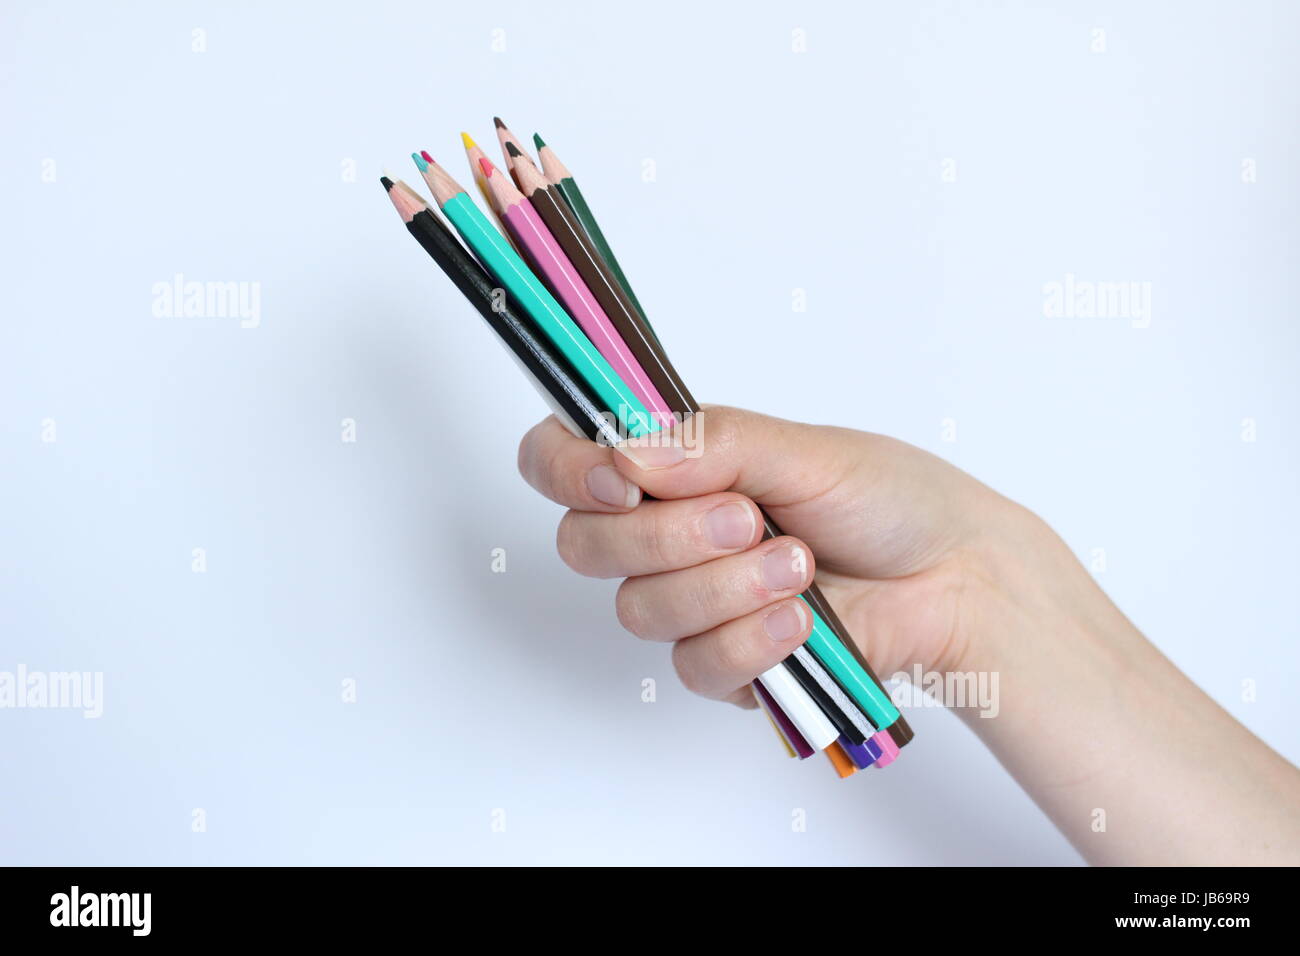 A hand filled with colored pencils on a white background Stock Photo